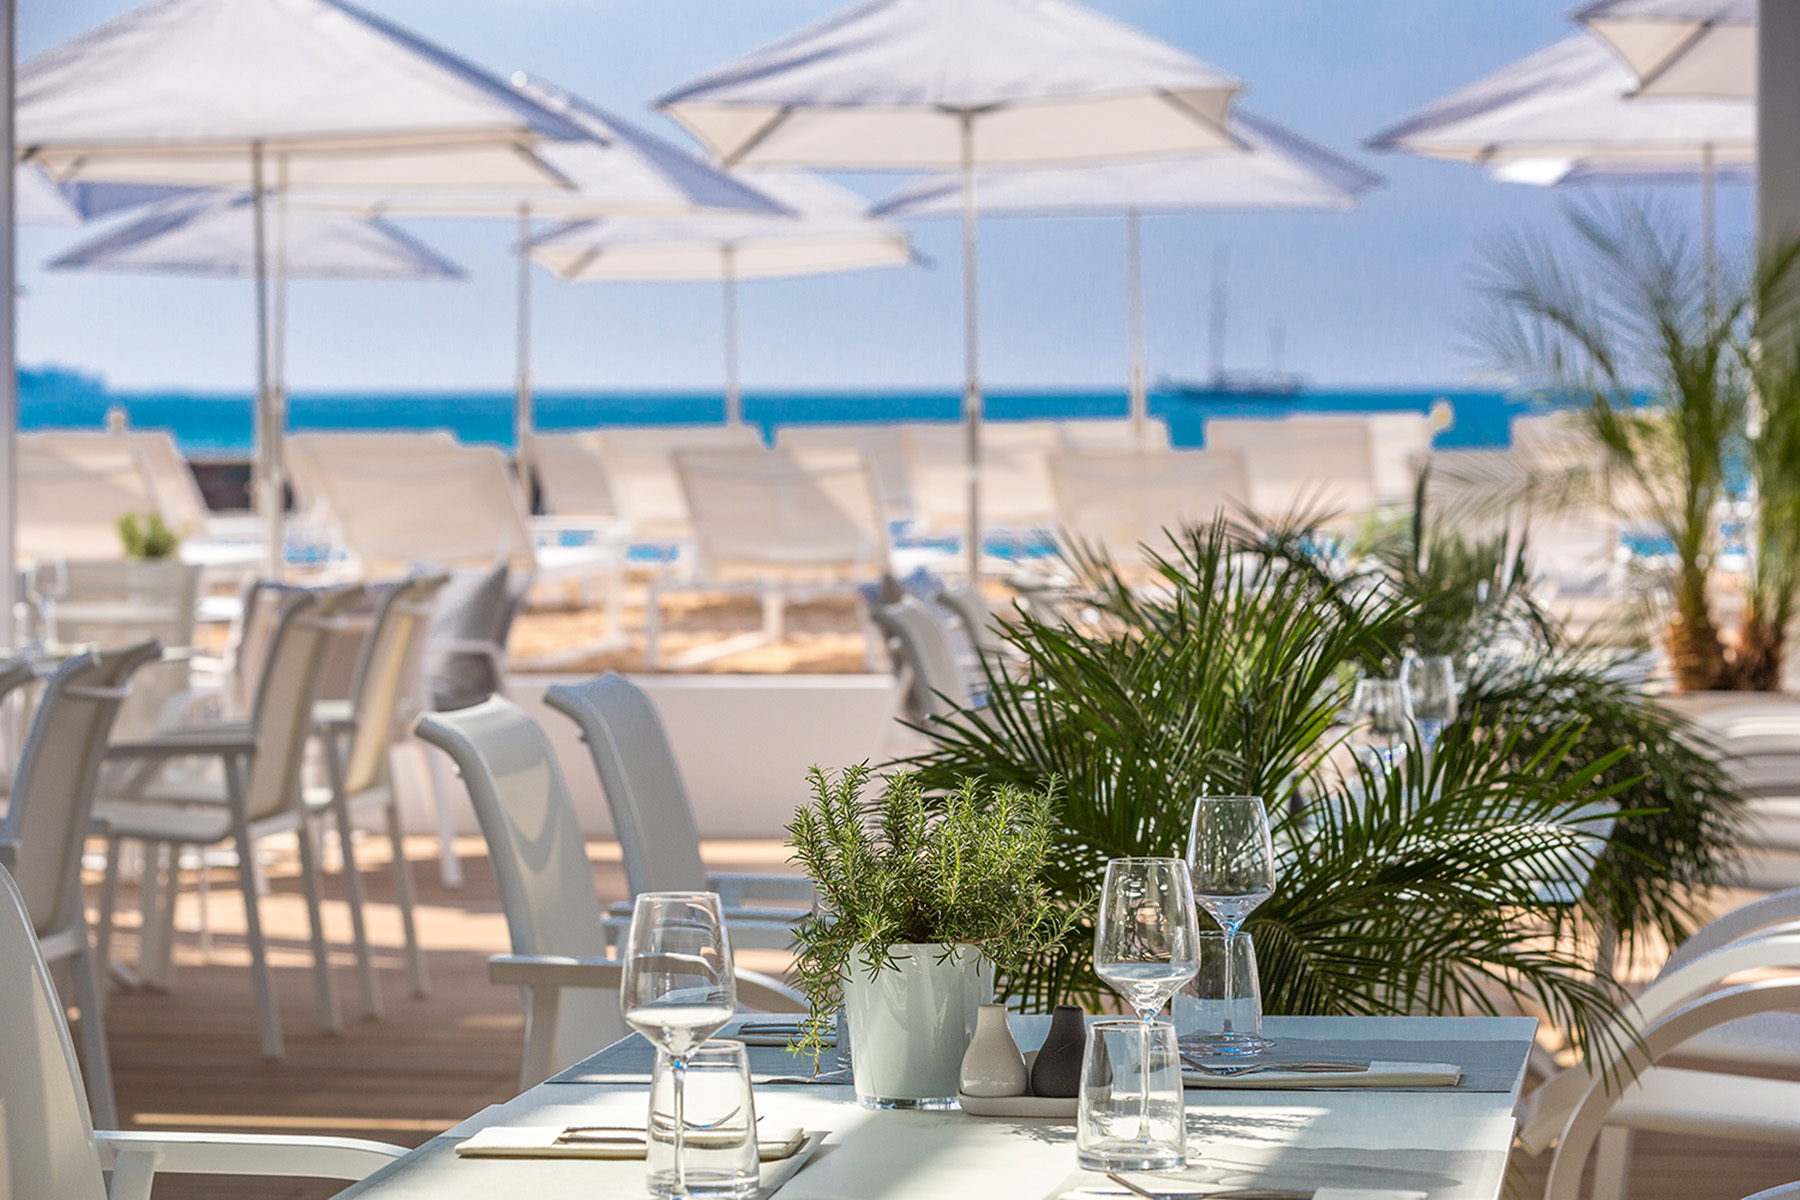 Terrace with sea view of the Majestic Barrière restaurant in Cannes, on the French Riviera, a 5 star barrier hotel designed by the interior design studio jean-philippe nuel